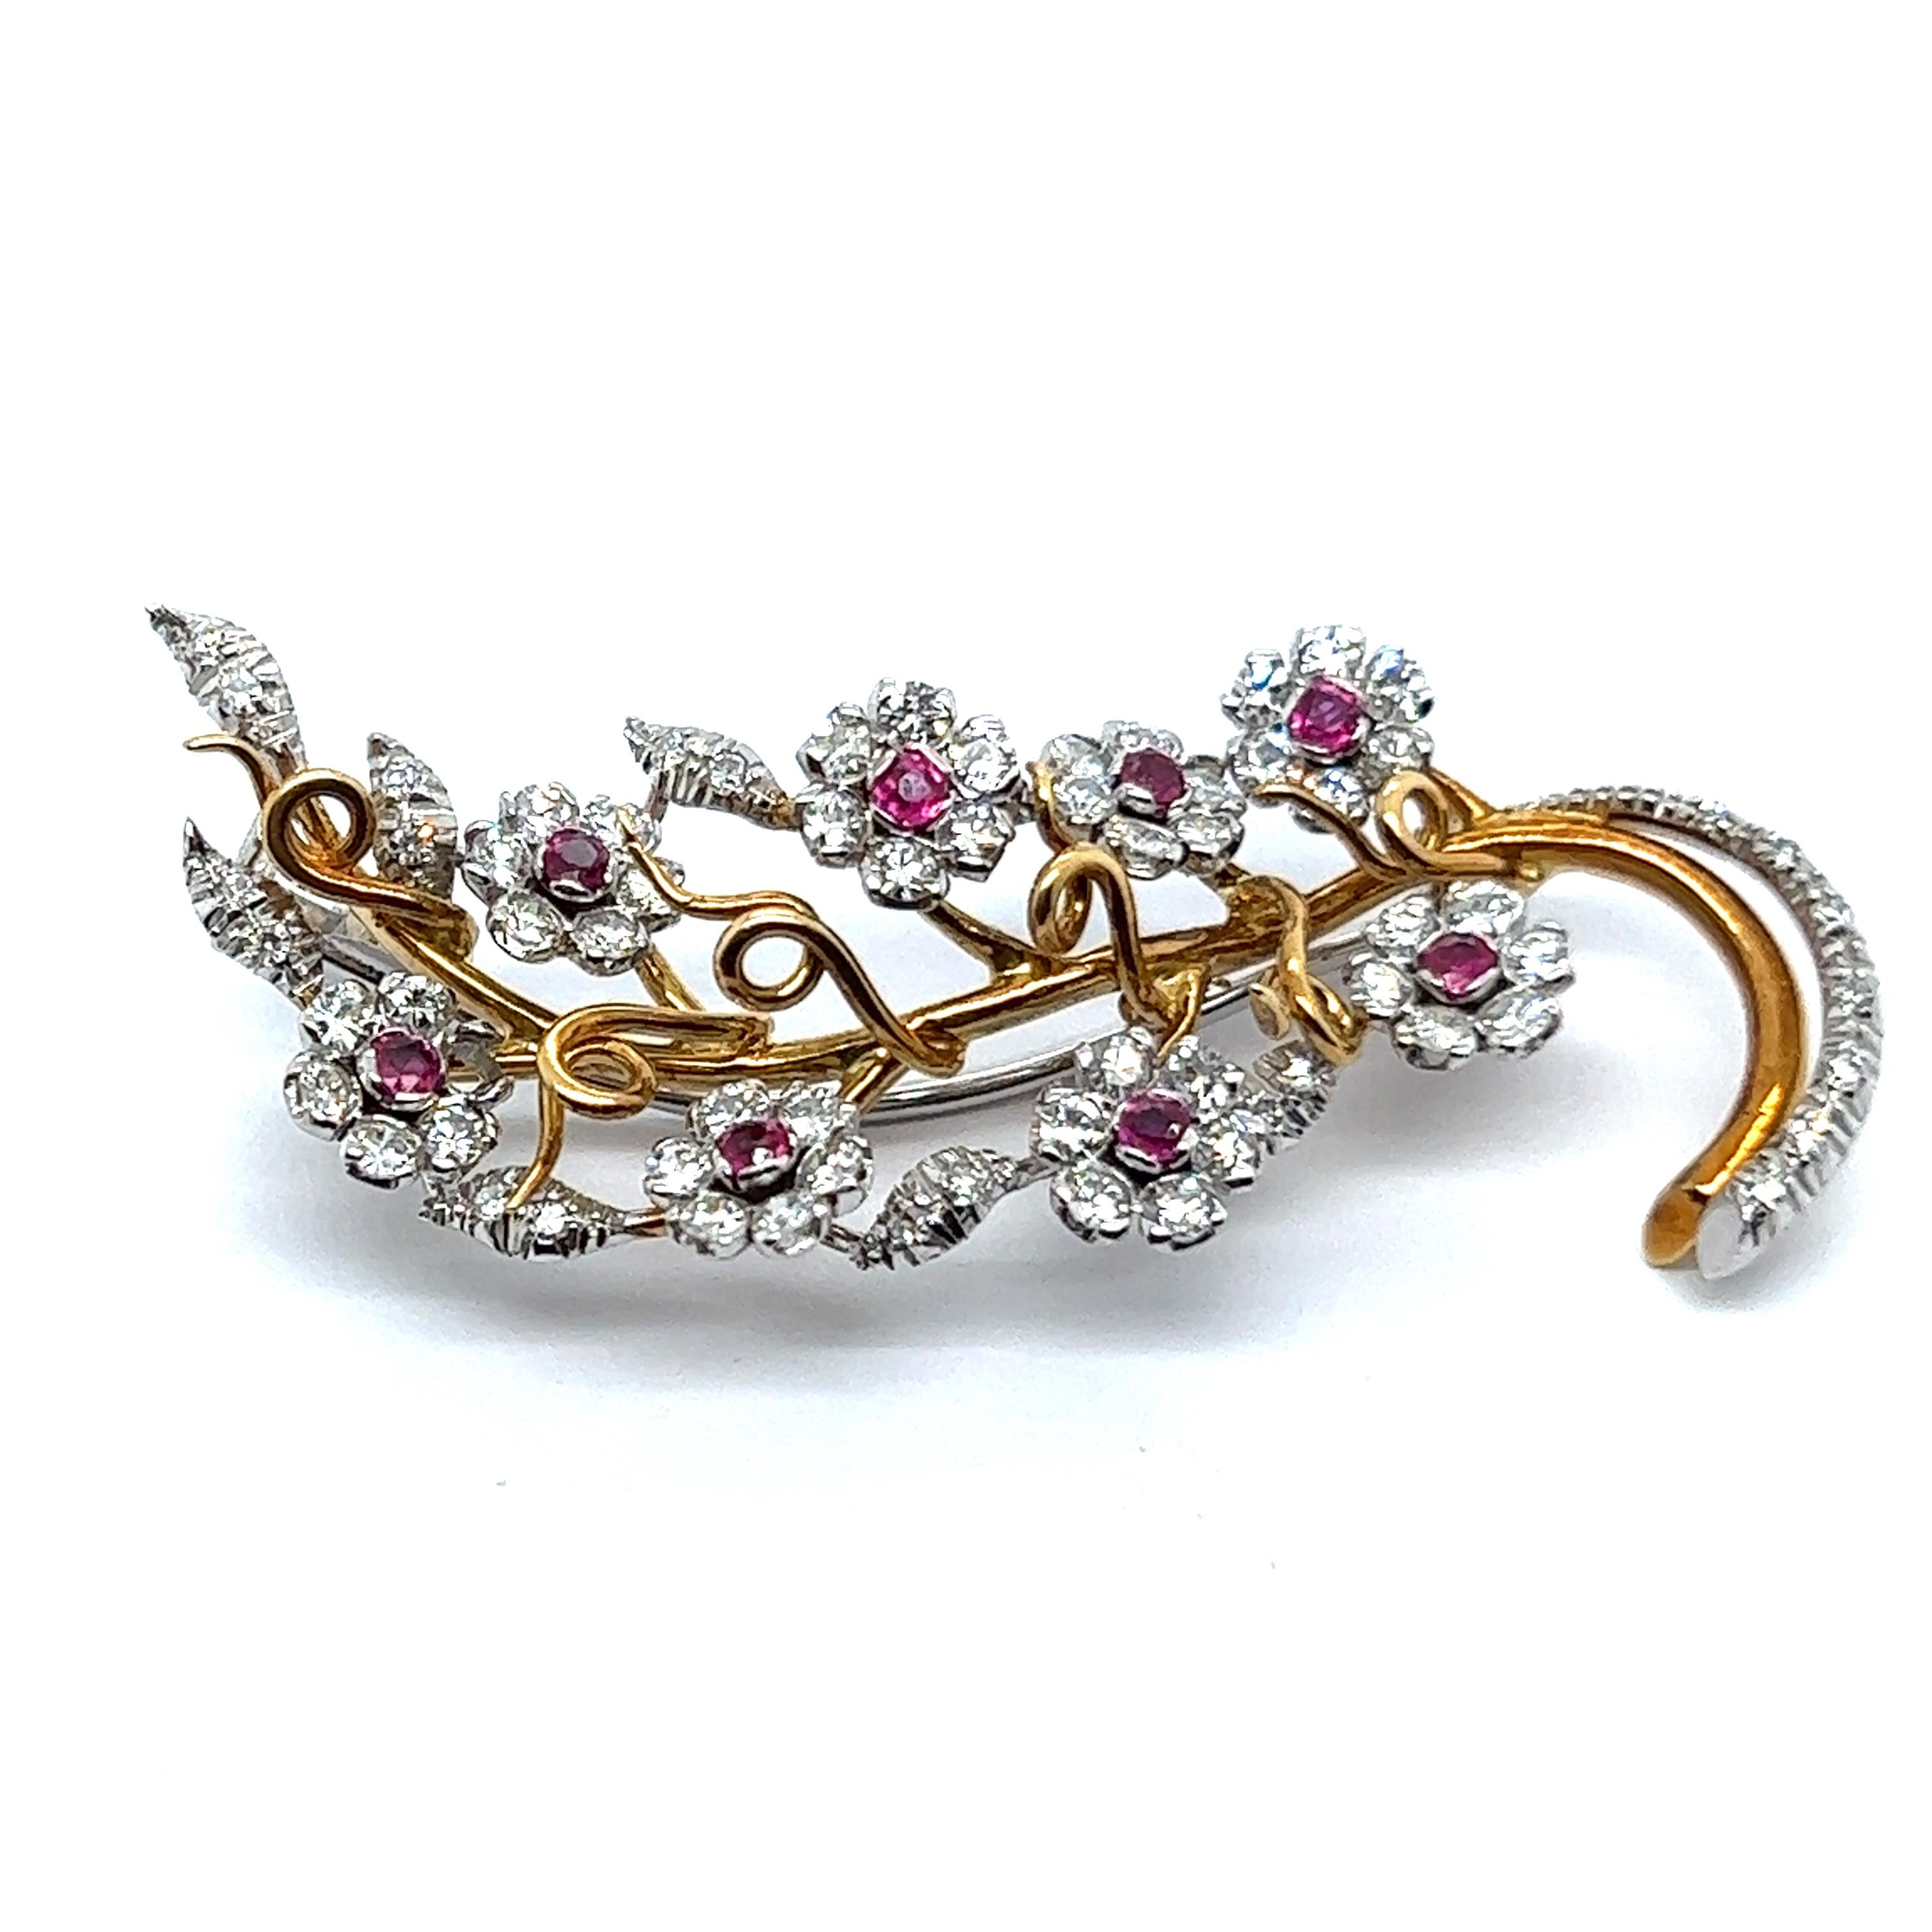 Introducing the Sakura Blossom Brooch - A Timeless Treasure!

Elevate your style with our exquisite blossom brooch, a true masterpiece that captures the essence of beauty and fleeting moments.

Meticulously crafted in 18 karat yellow and white gold,